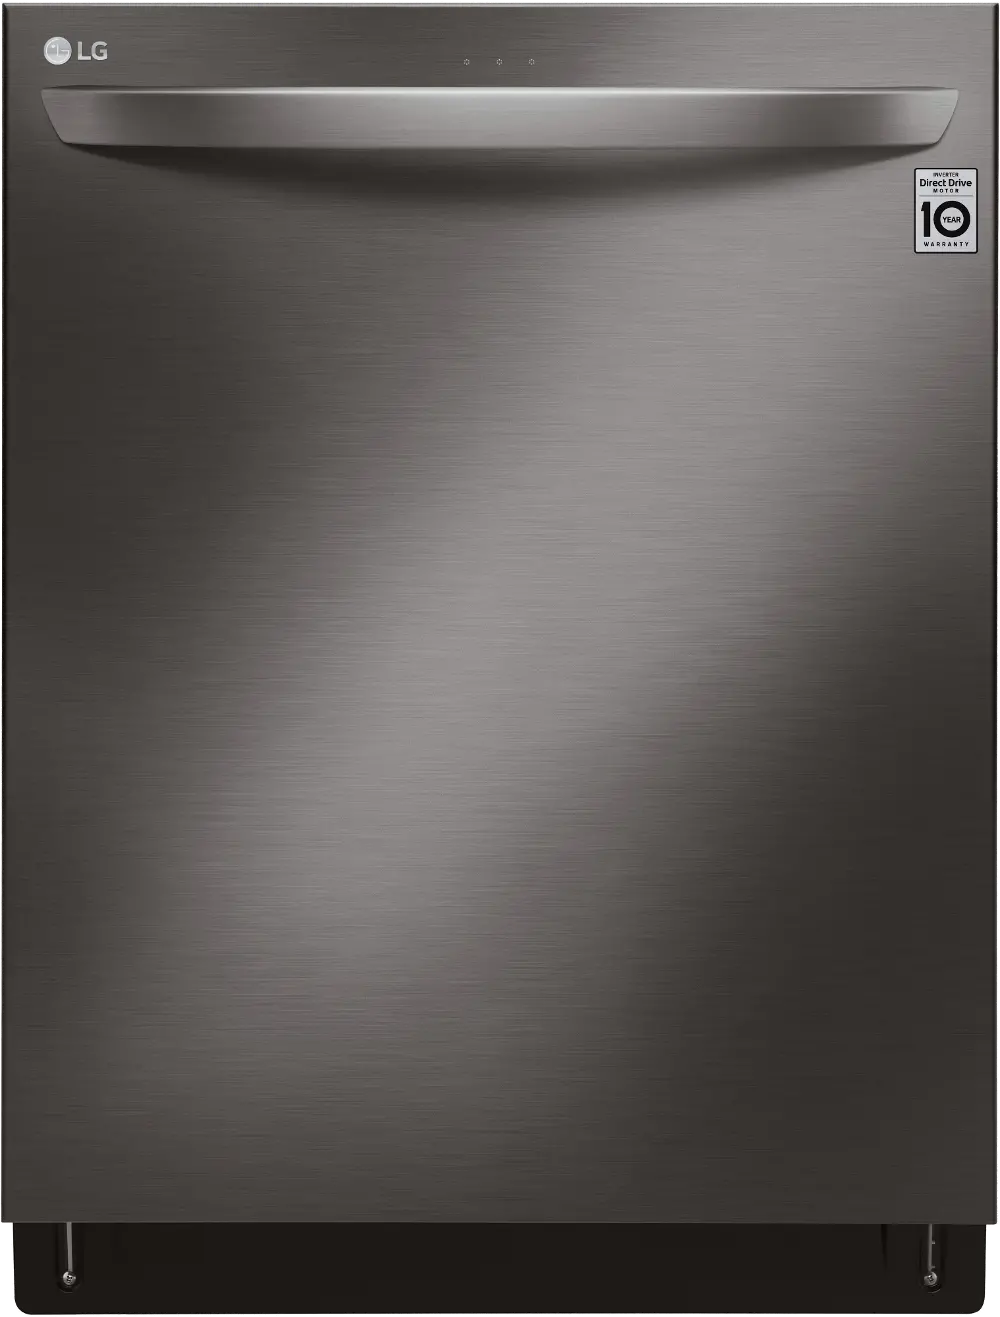 LDT6809BD LG Top Control Smart Dishwasher with Towel Bar Handle - 24 Inch Black Stainless Steel-1